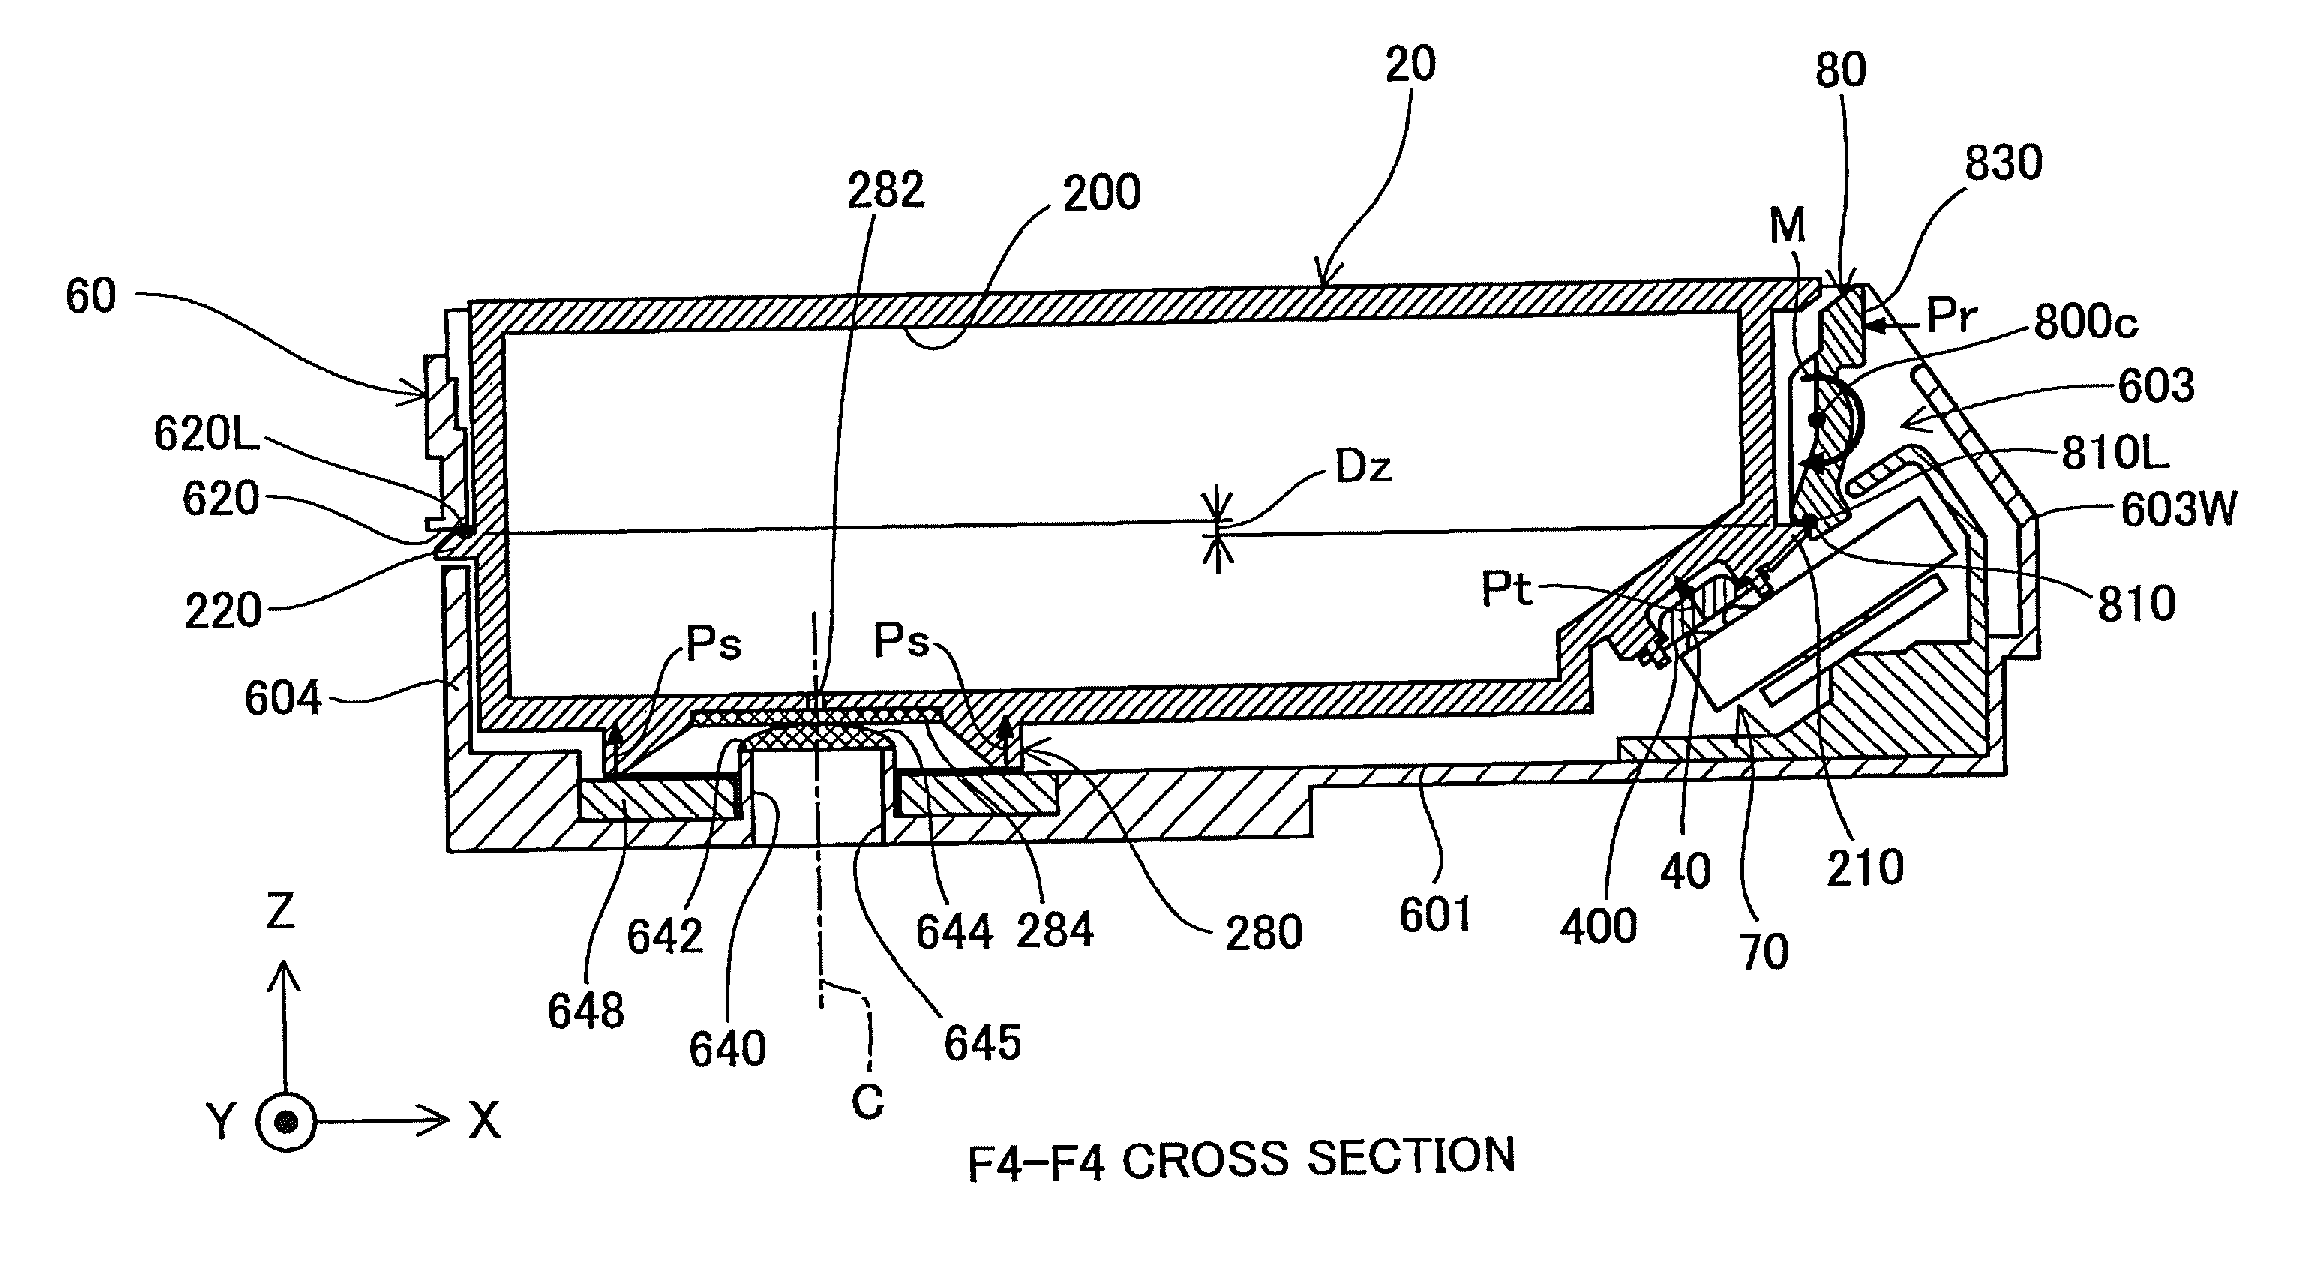 Cartridge and printing material supply system